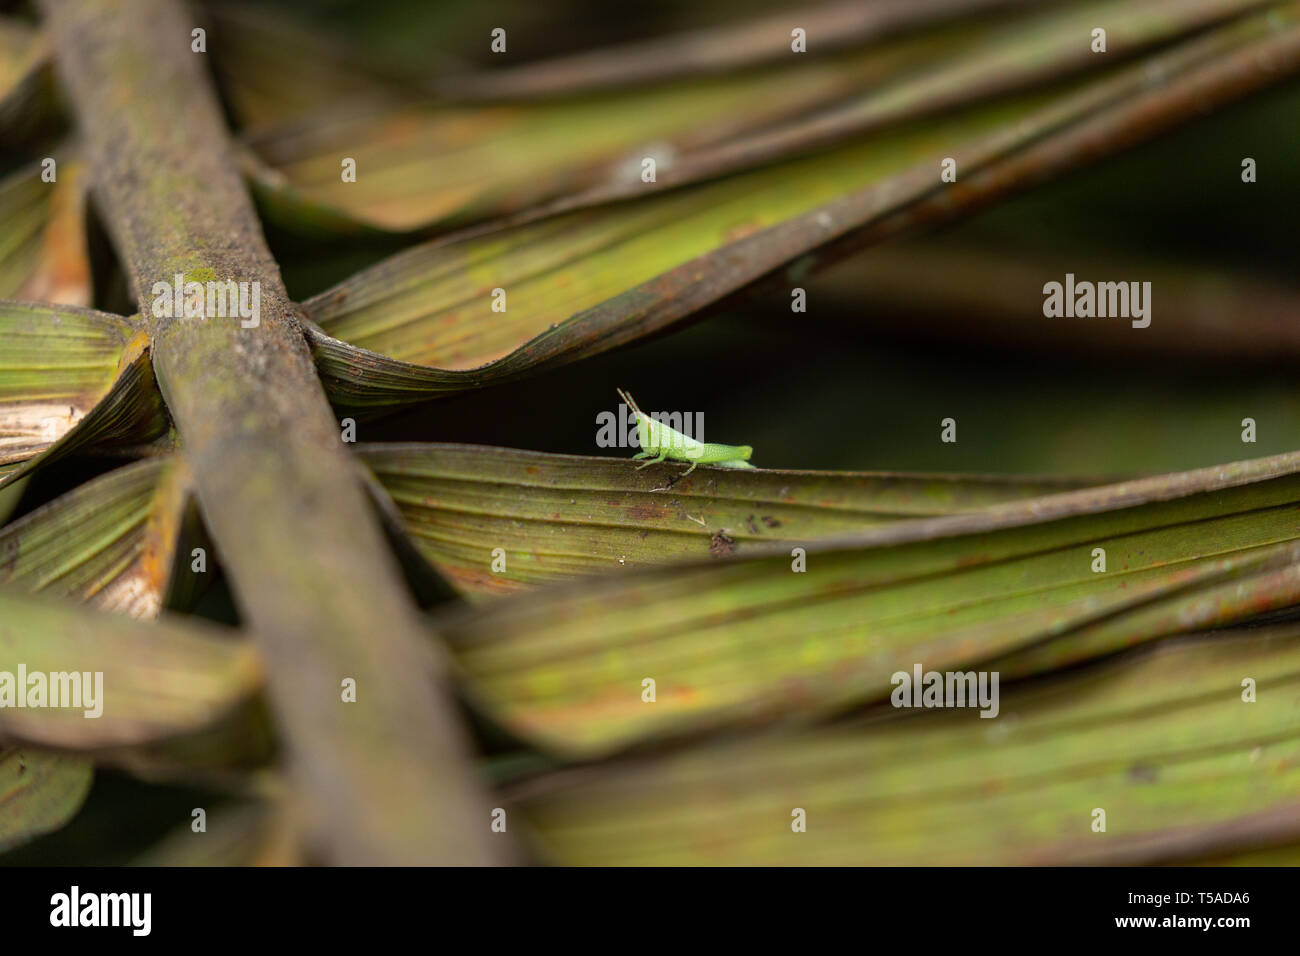 Small green grasshopper perched on a palm frond Stock Photo